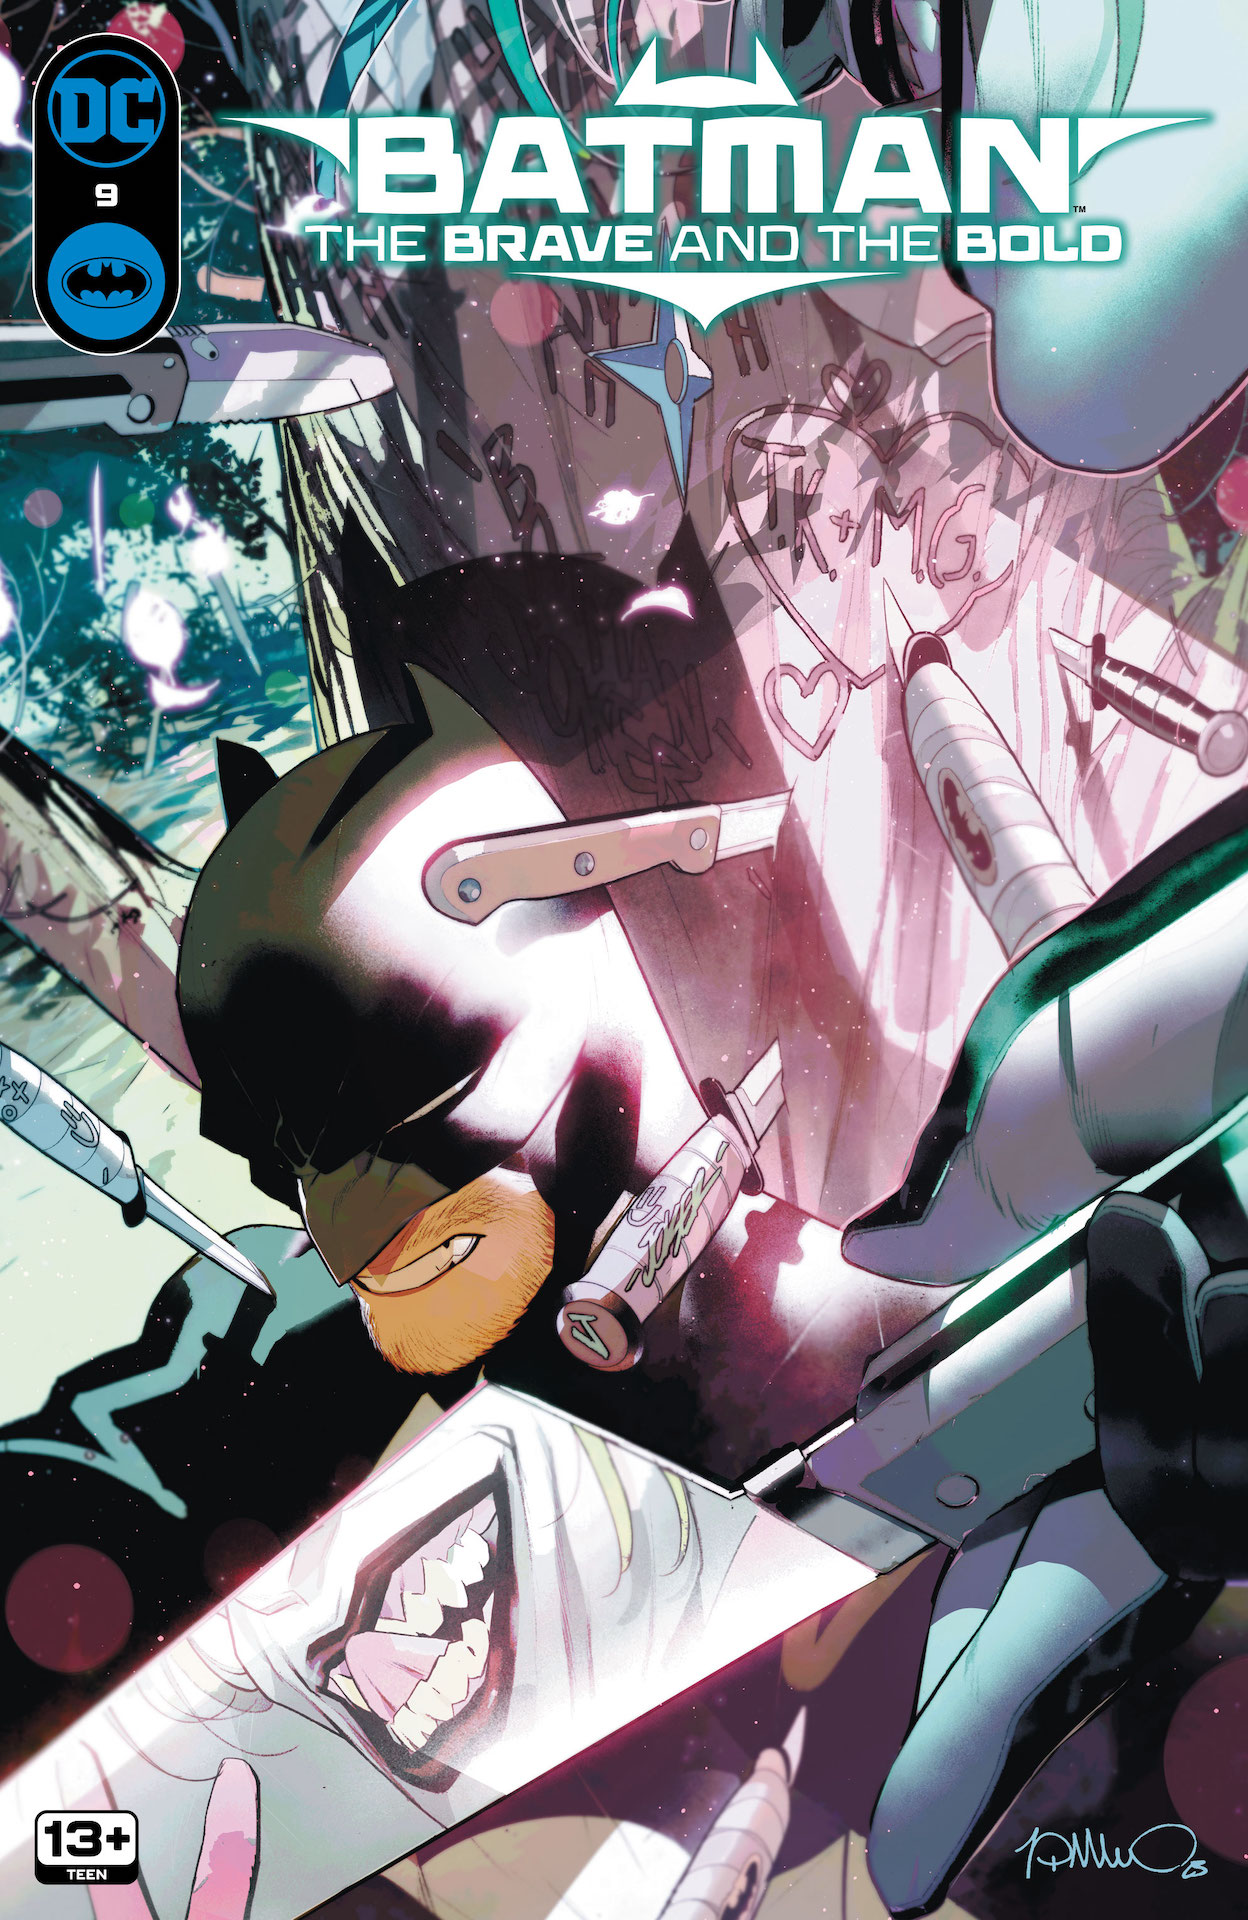 DC brings back Batman: The Brave and the Bold in comics ahead of